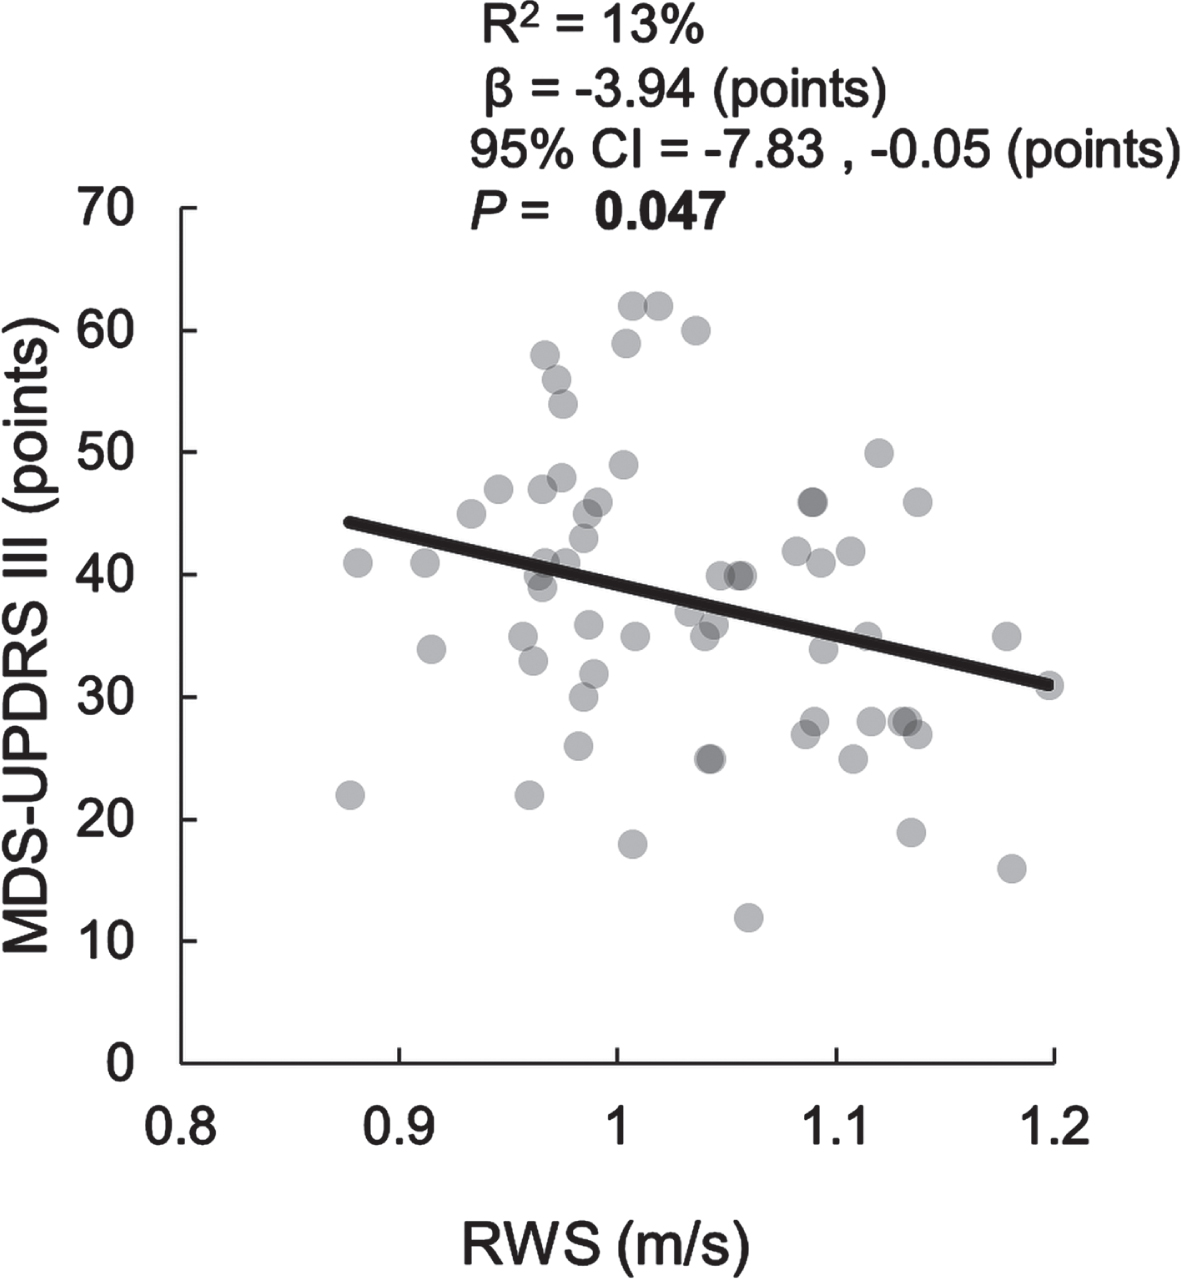 Cross-sectional relationship between MDS-UPDRS III and RWS for Walking Bouts between 30 and 60 seconds.